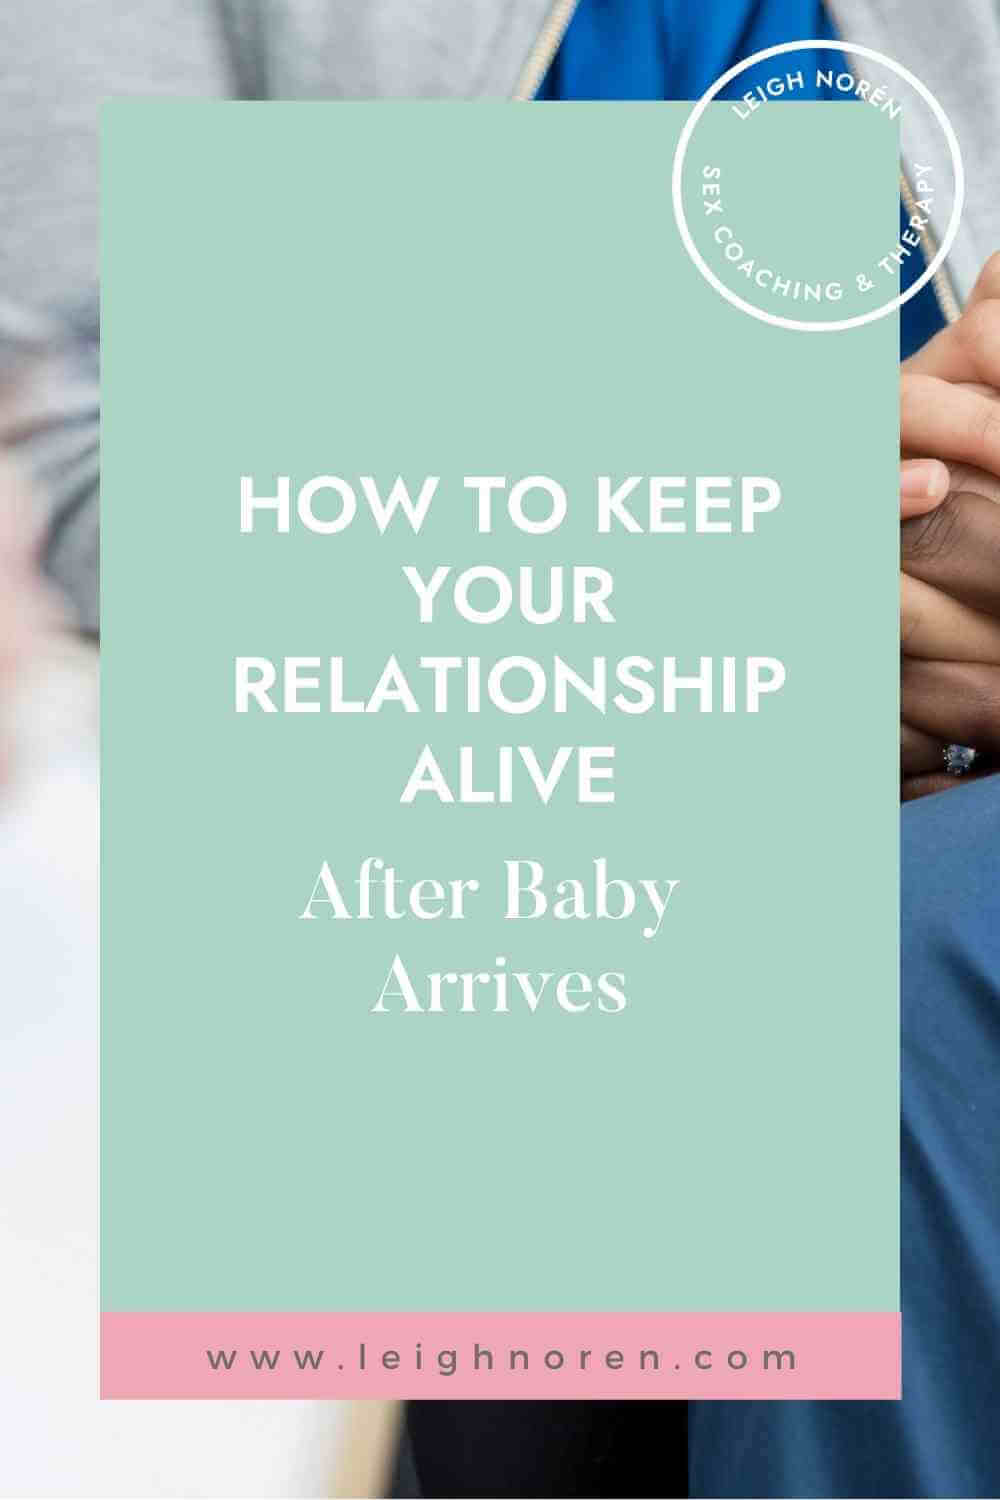 How to Keep Your Relationship Alive After Baby Arrives